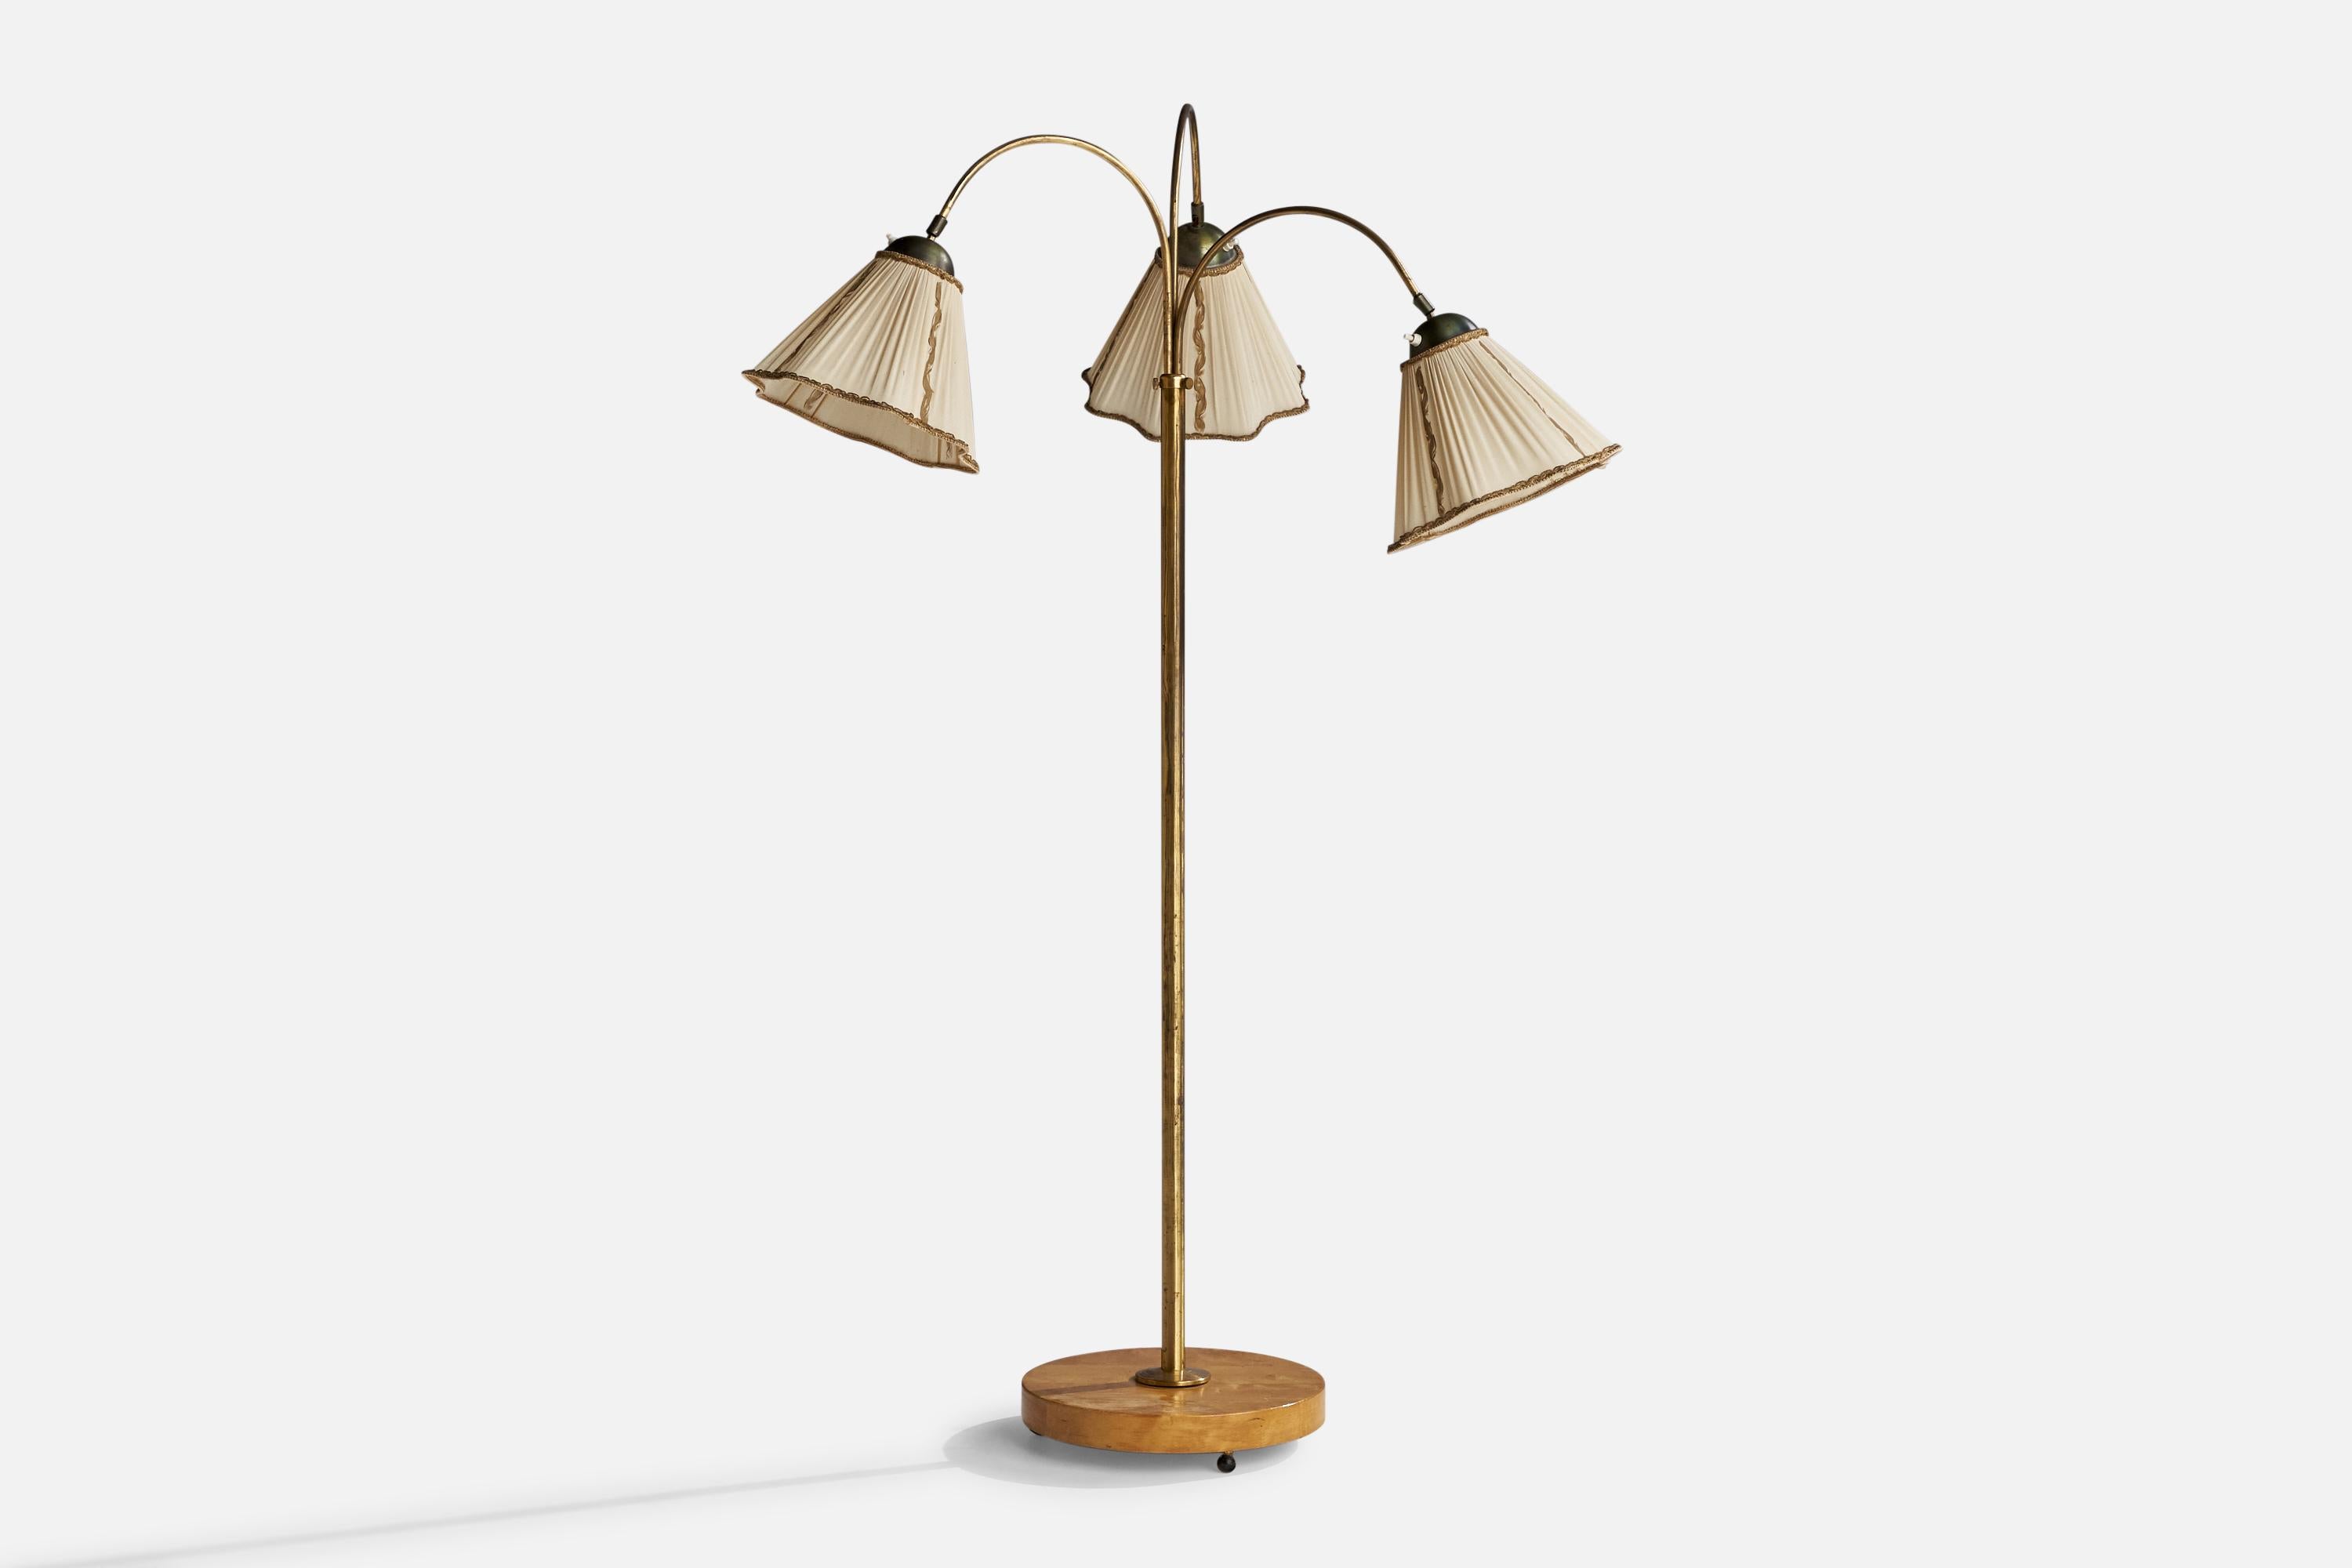 An adjustable three-armed brass, off-white fabric and birch floor lamp designed and produced in Sweden, 1940s.

Dimensions variable.
Overall Dimensions (inches): 59.25”  H x 42” W x 28”  D
Stated dimensions include shade.
Bulb Specifications: E-26